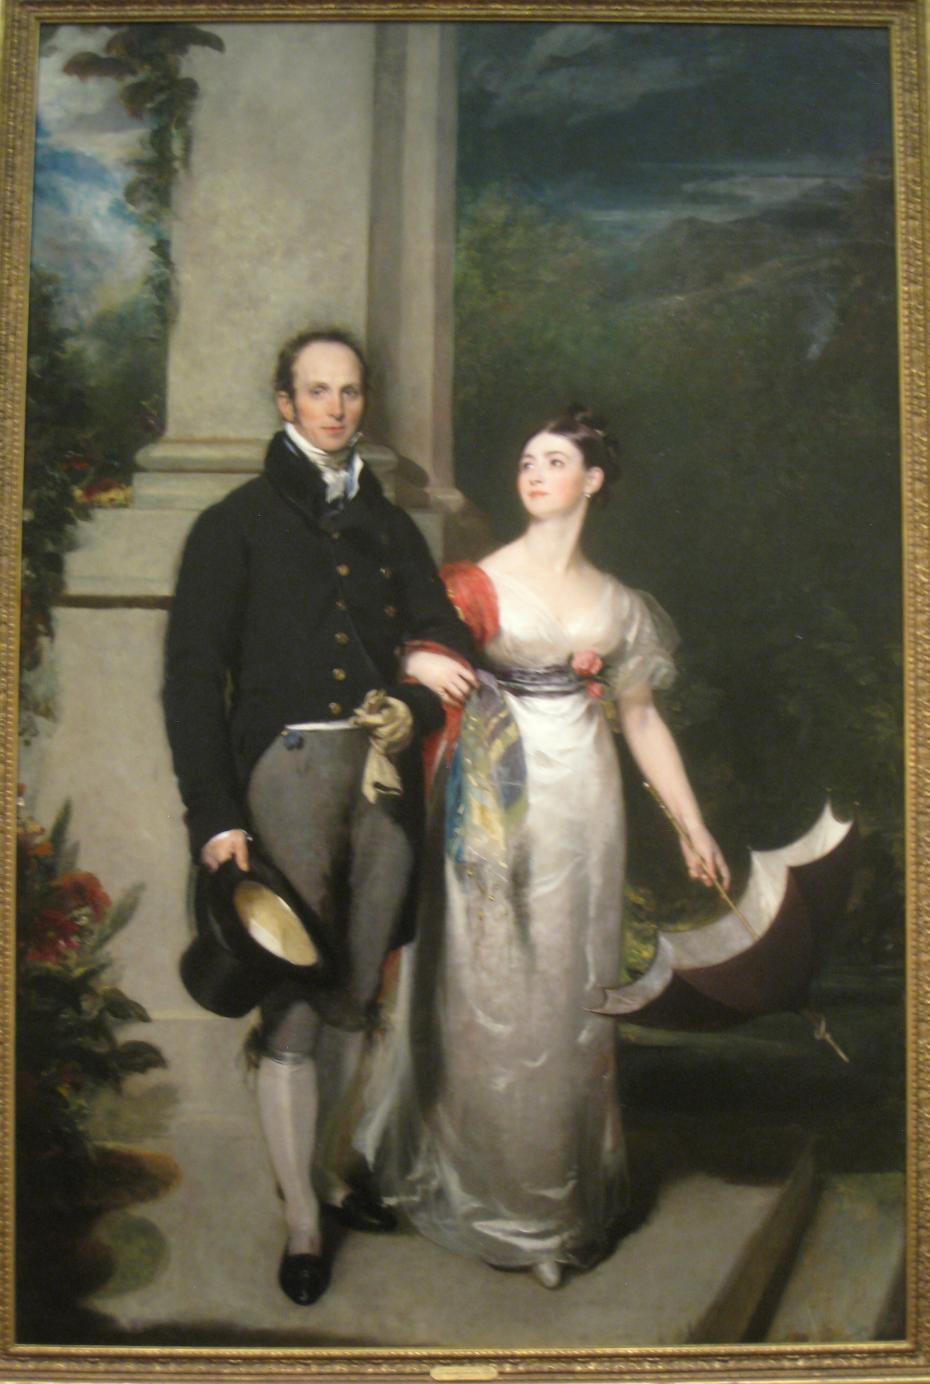 ‘Mr and Mrs James Dunlop’, painted by Thomas Lawrence, circa 1825, willed to Girton by Jane Catherine Gamble but then returned to the Dunlop family in Scotland at their request, and subsequently sold. Painting now held in the Worcester Art Museum (Worcester, Massachusetts, USA).